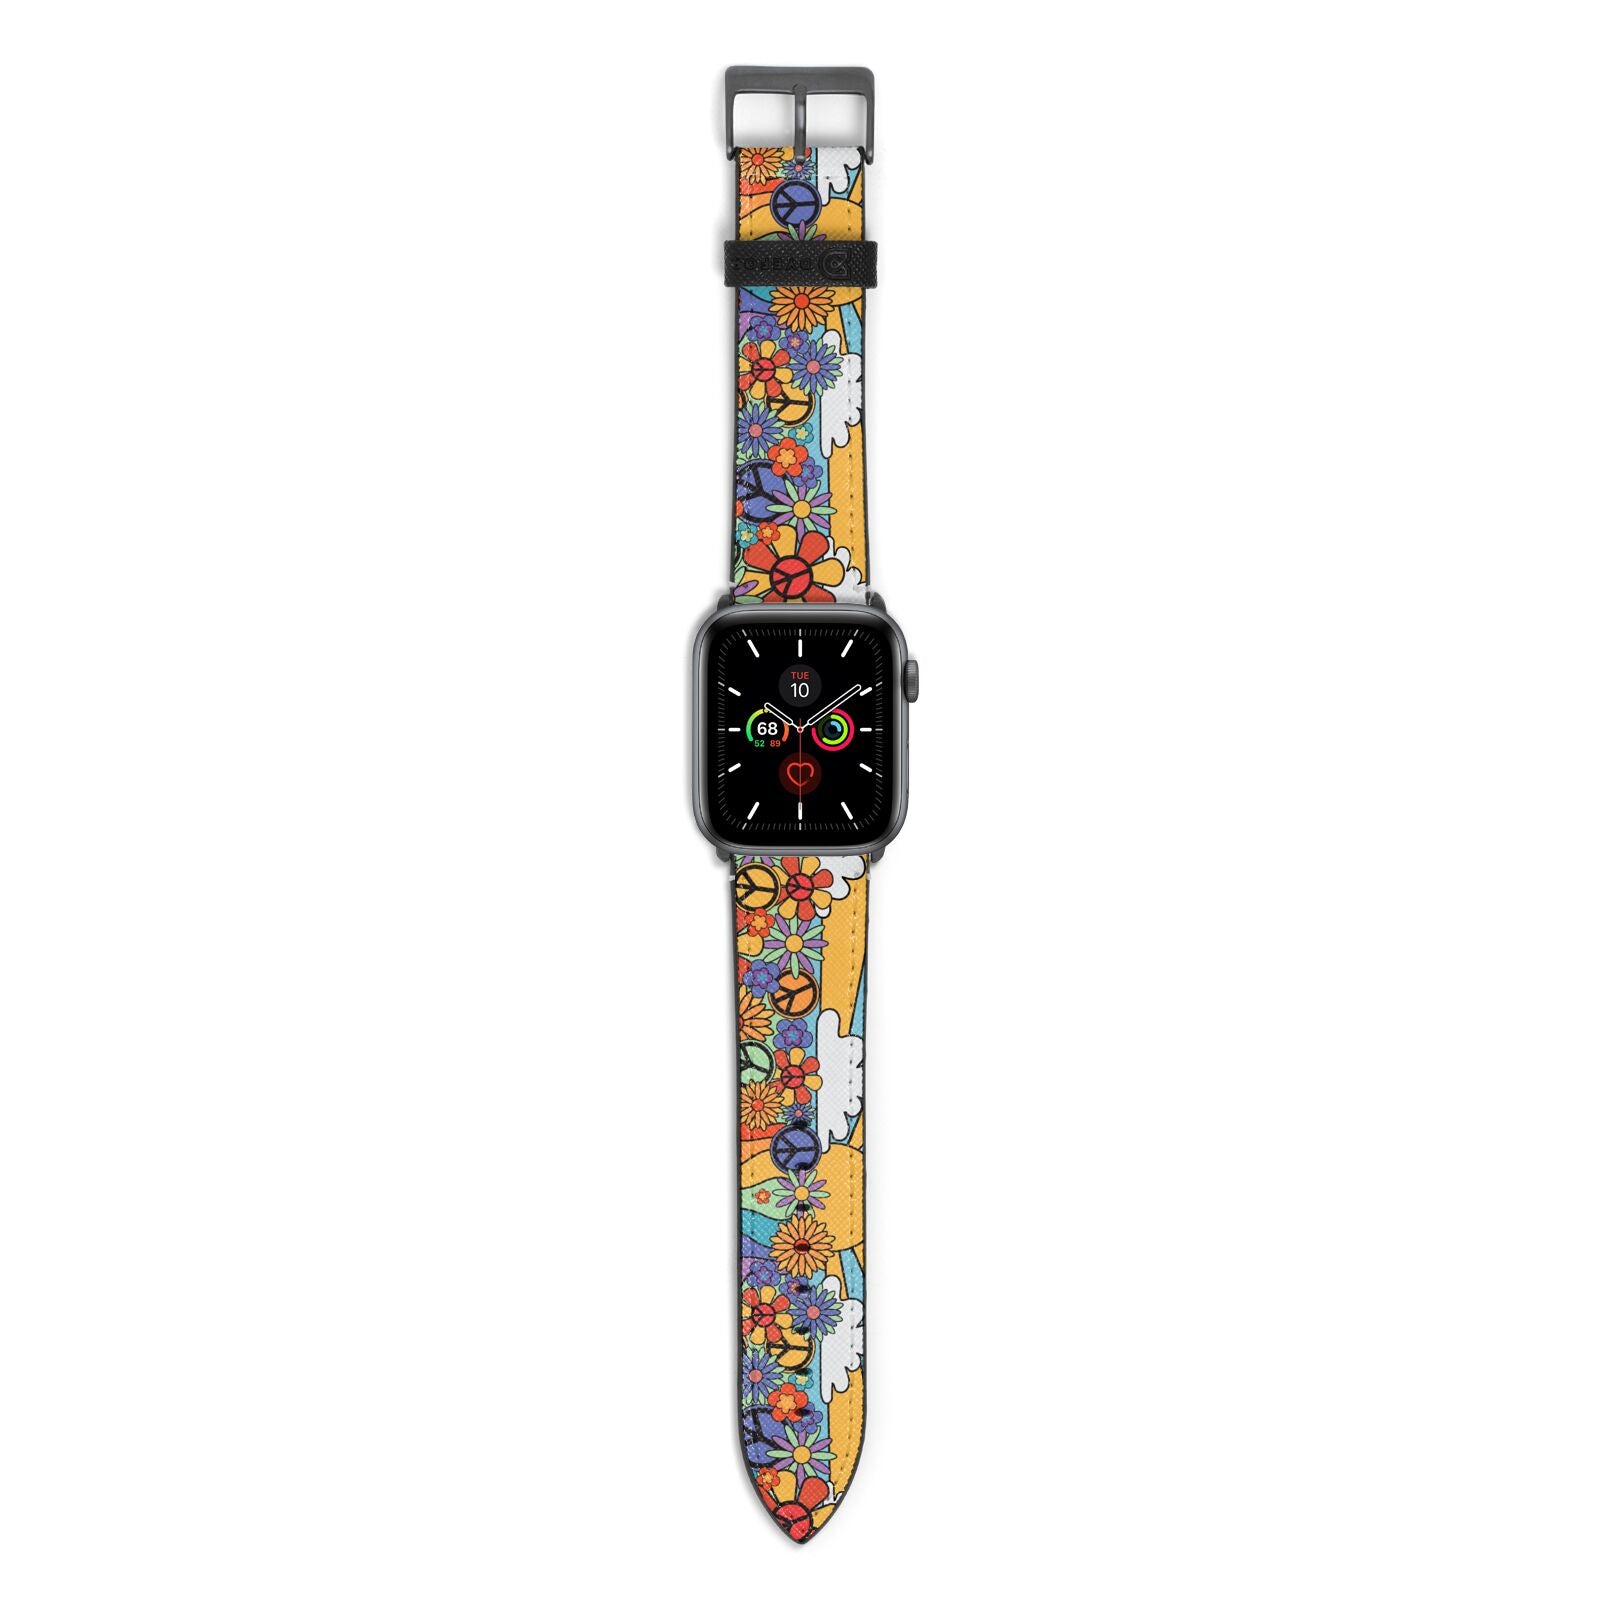 Seventies Groovy Retro Apple Watch Strap with Space Grey Hardware